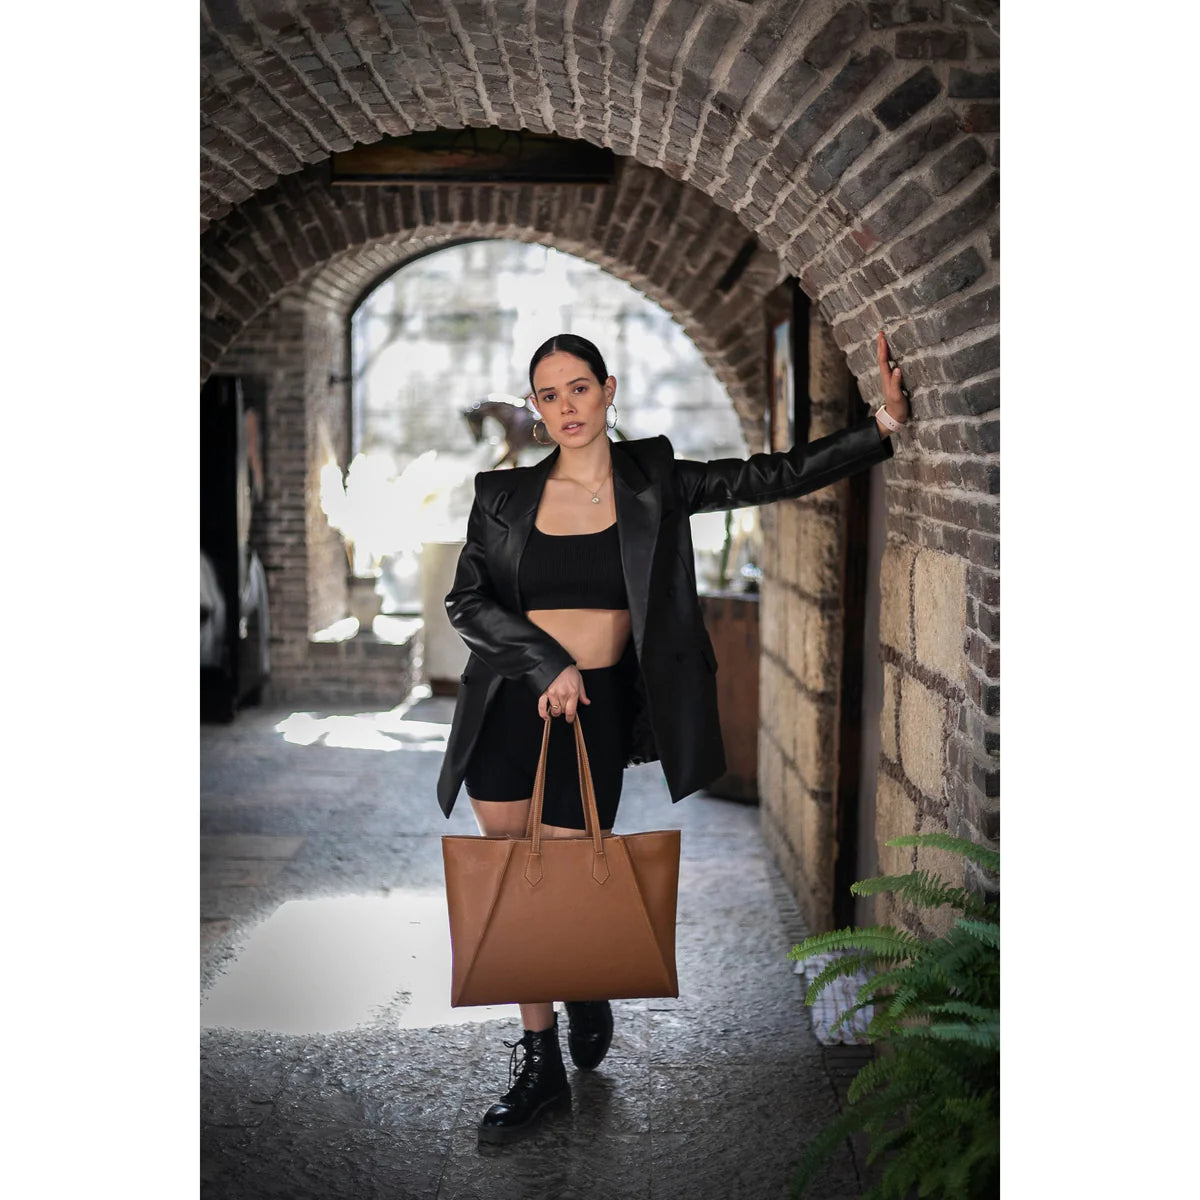 A model in a black monochromatic outfit showing how to style handbags with a coffee tote bag in OnPost